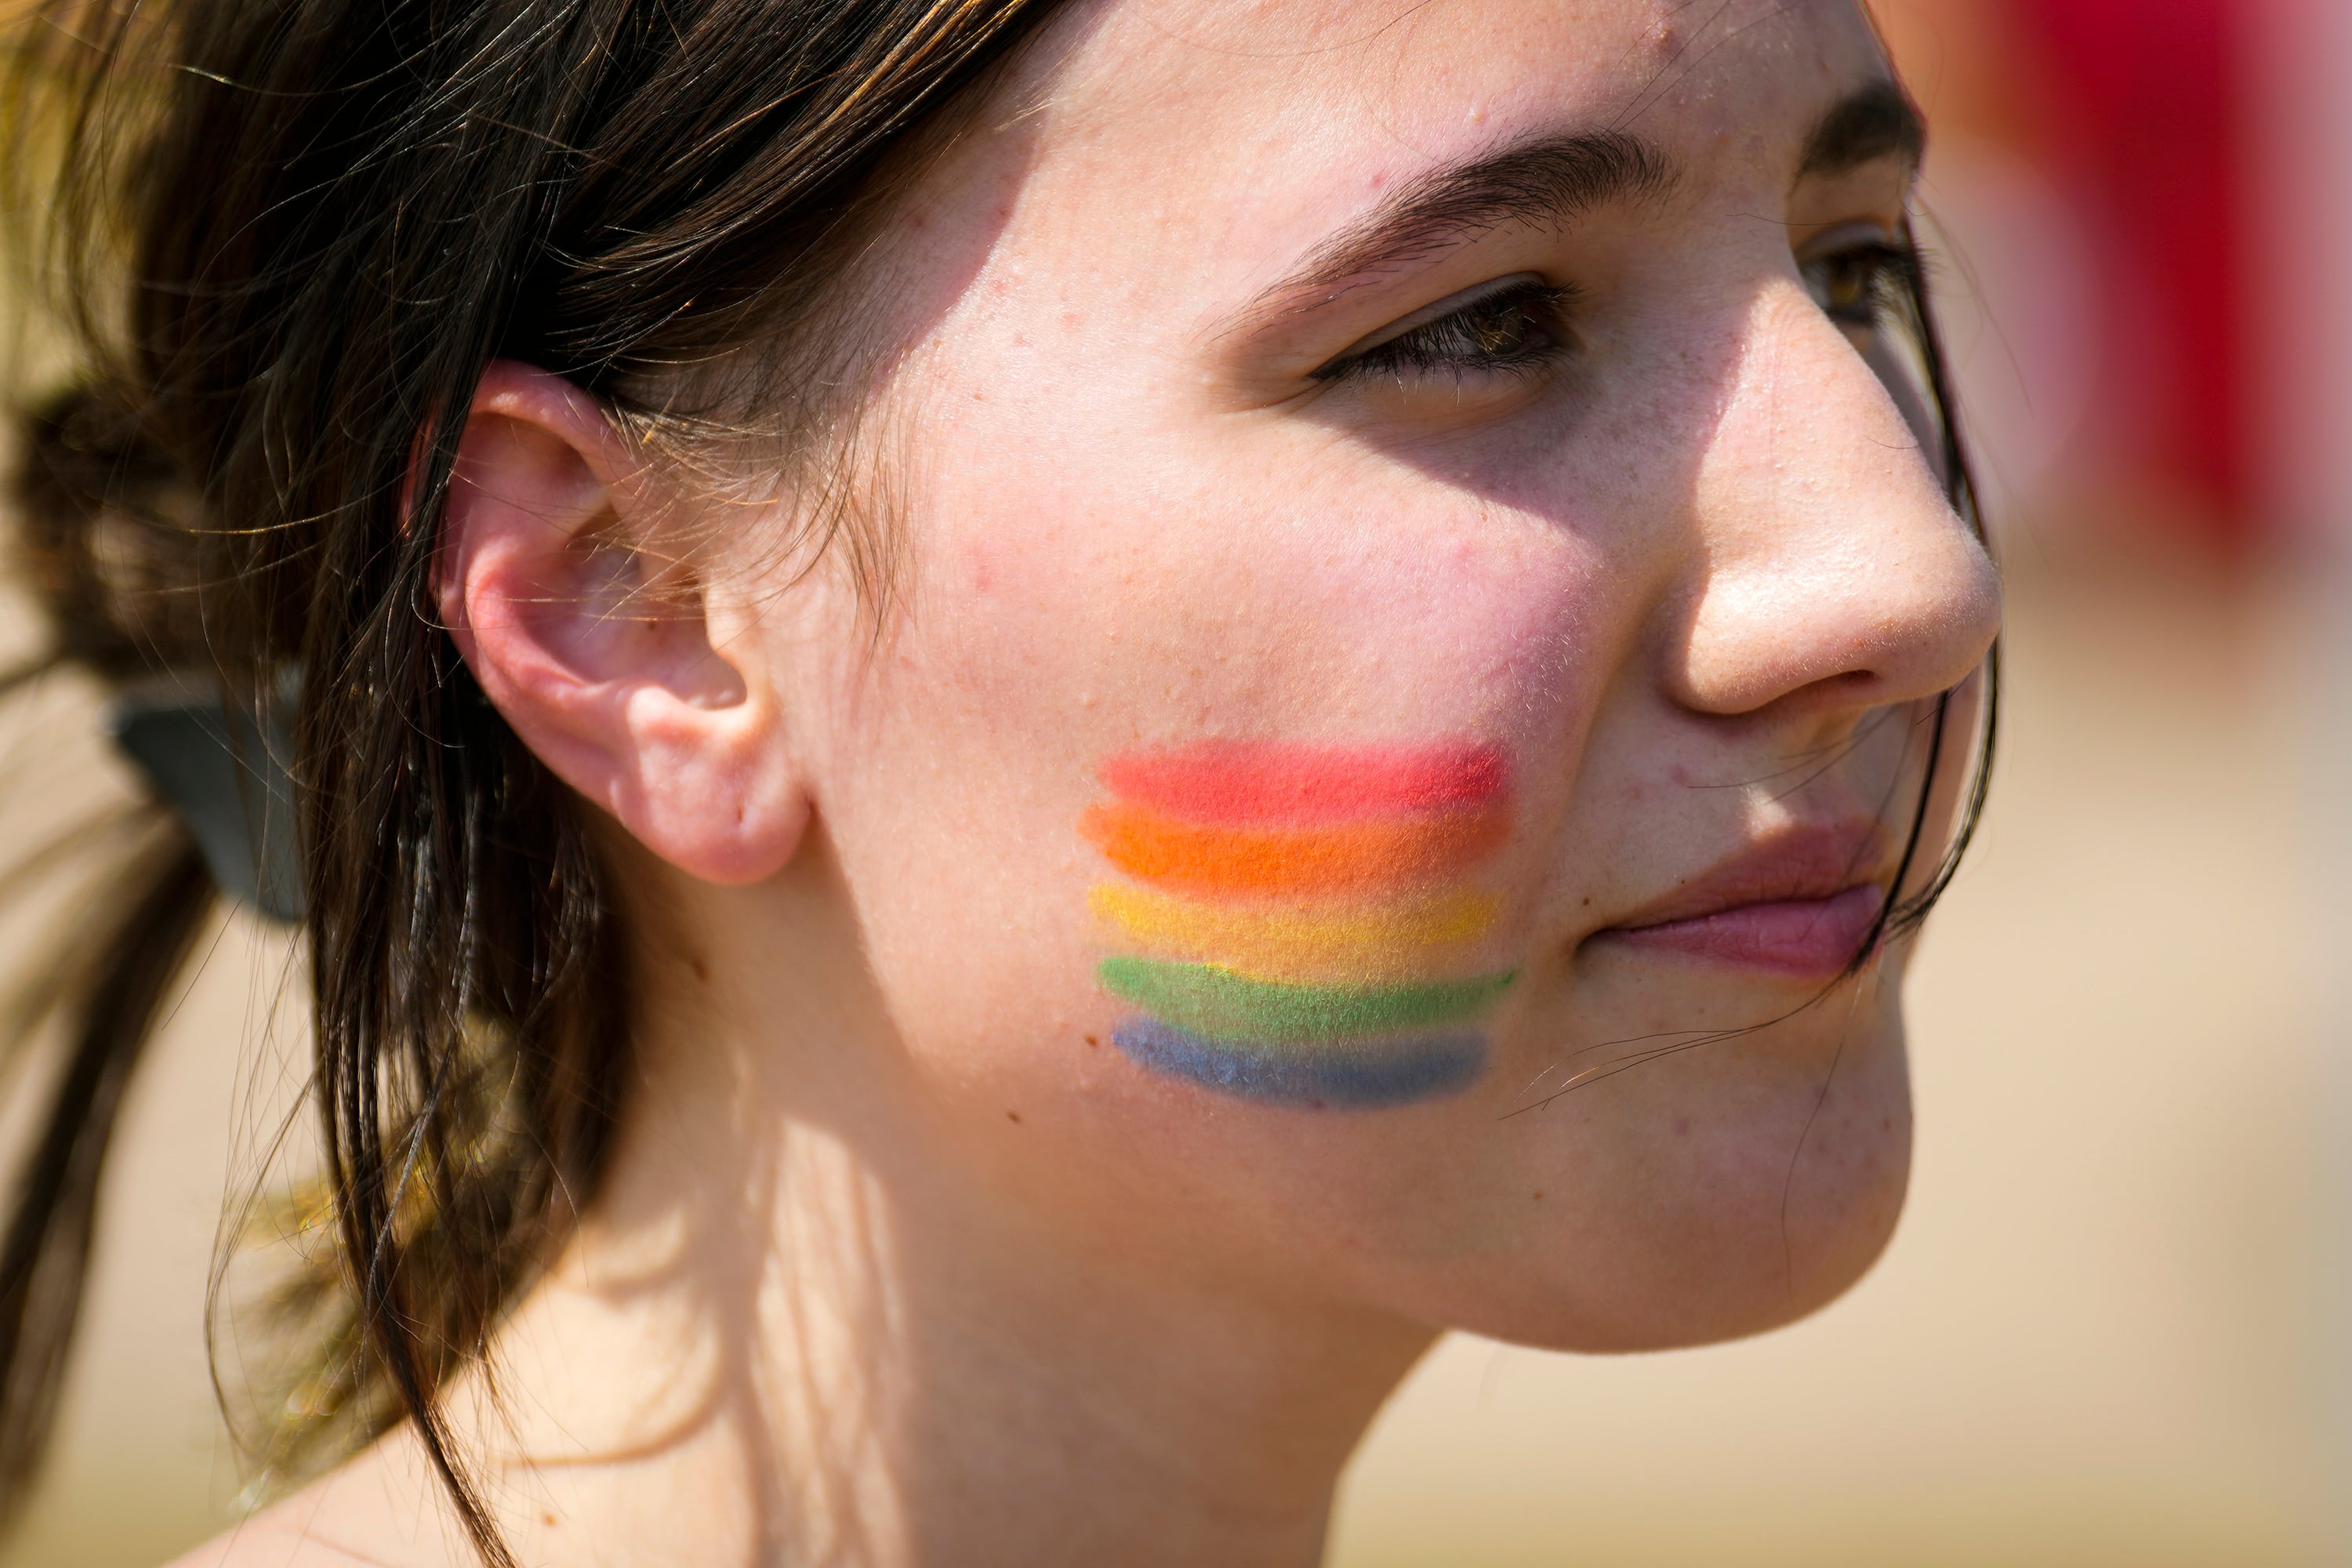 A close up of a young person's face with dark brown hair tied up and a rainbow of colors painted on their cheek.